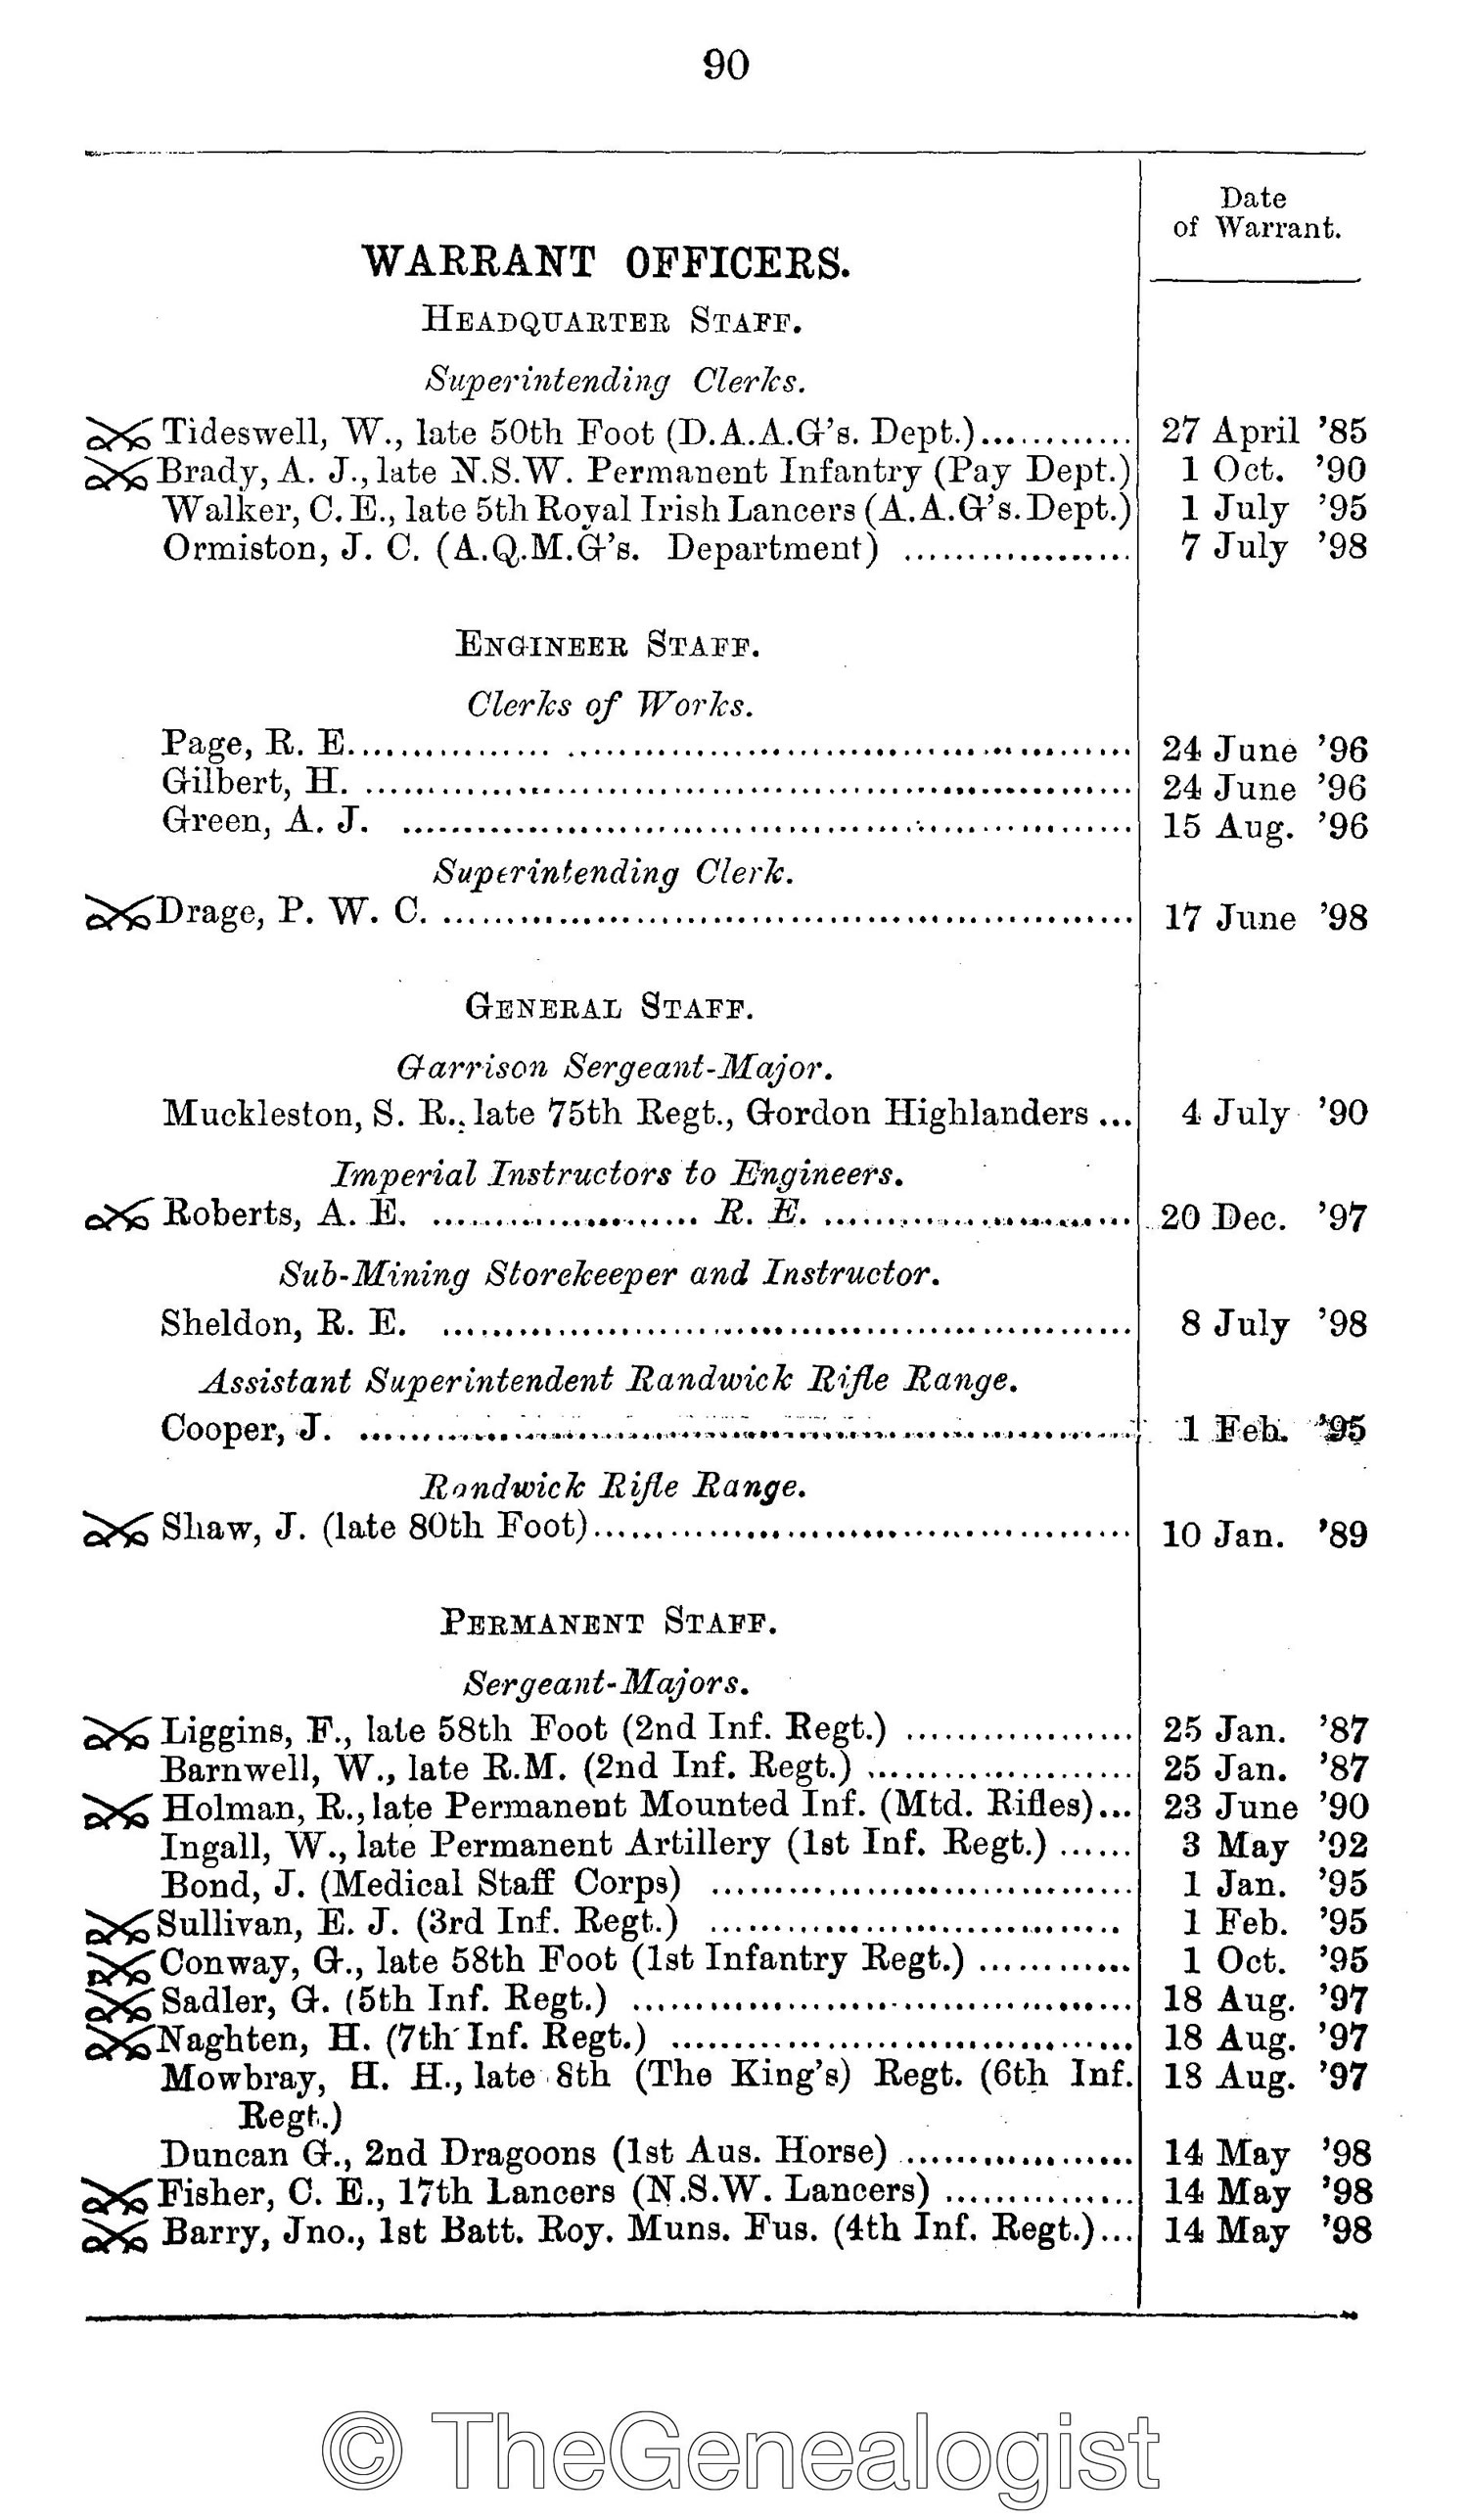 New South Wales Army and Navy List 1898 that will give you names of Officers and Warrant Officers